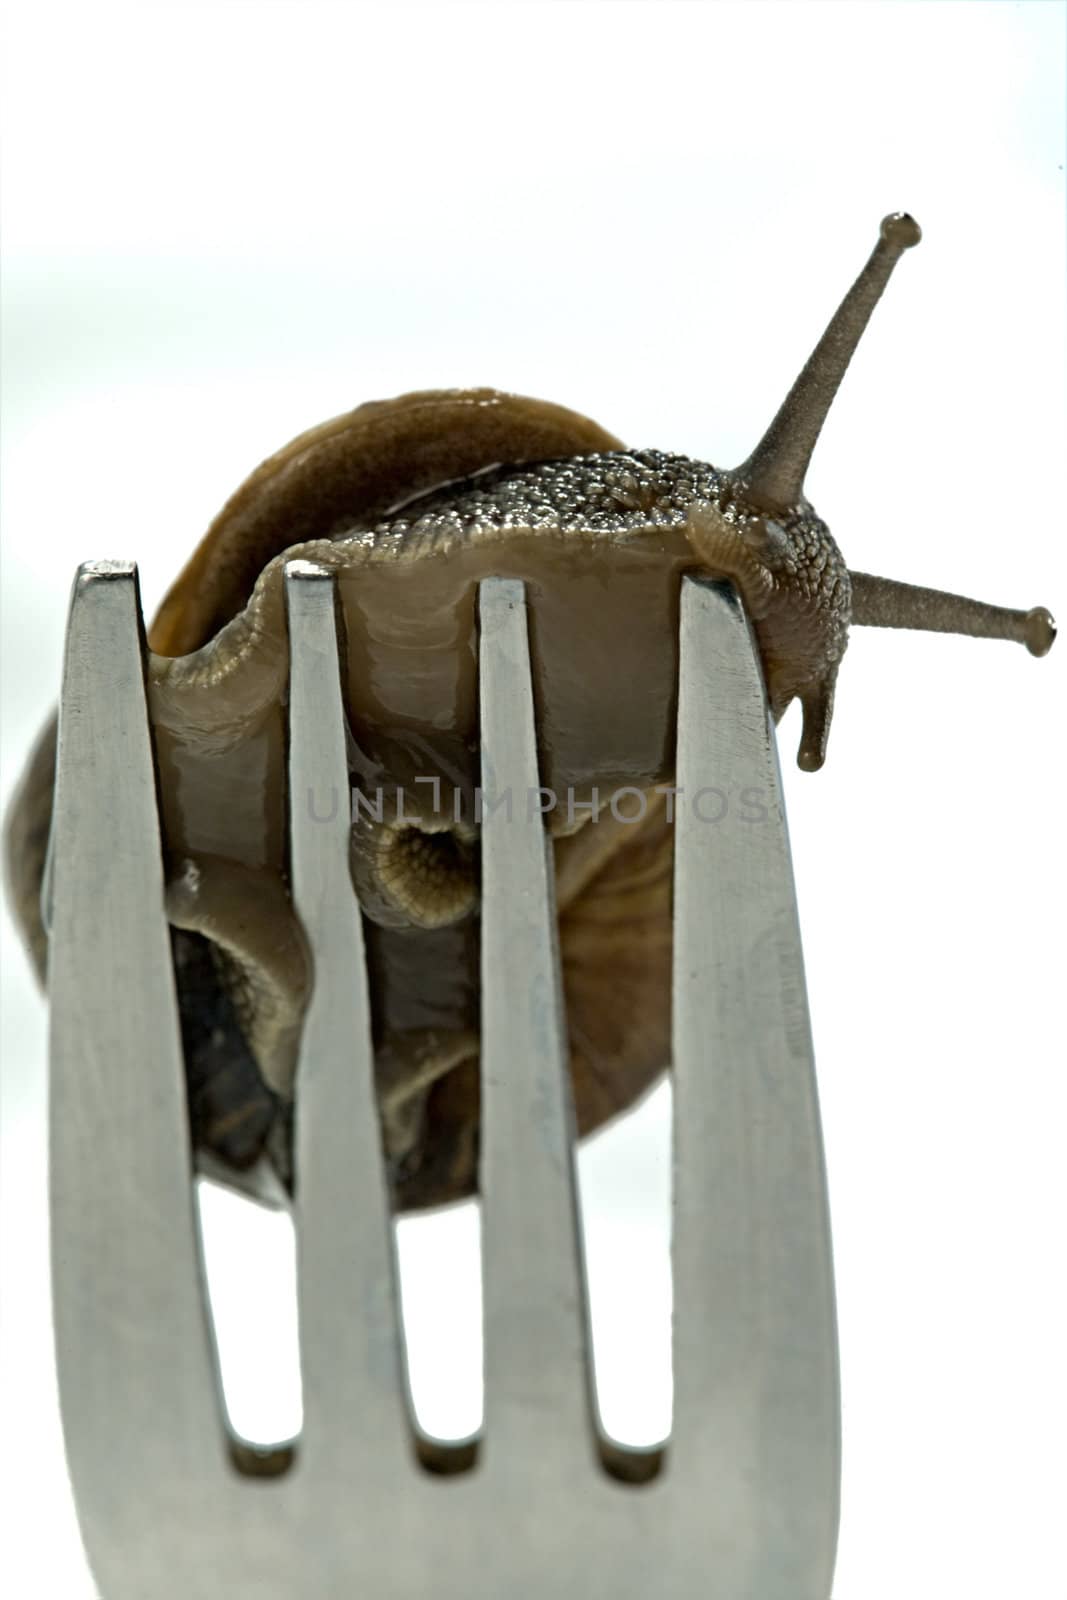 A snail crawling on the end of a fork